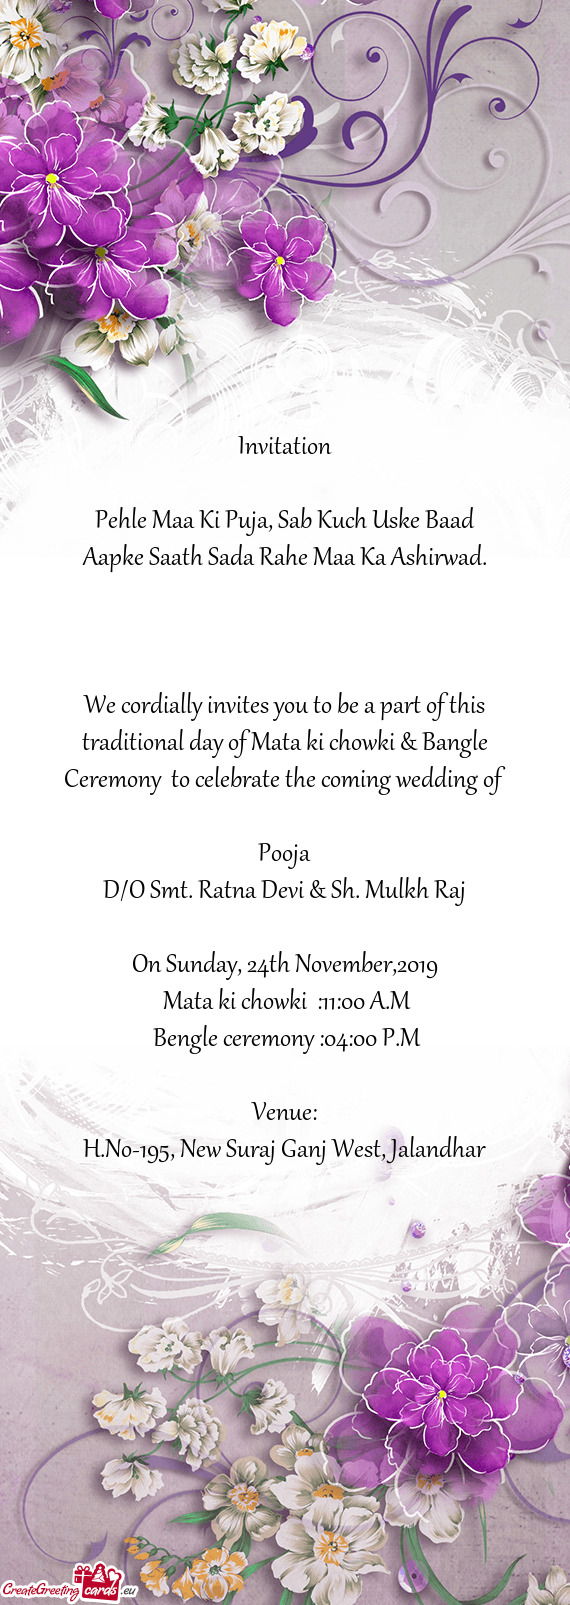 We cordially invites you to be a part of this traditional day of Mata ki chowki & Bangle Ceremony t